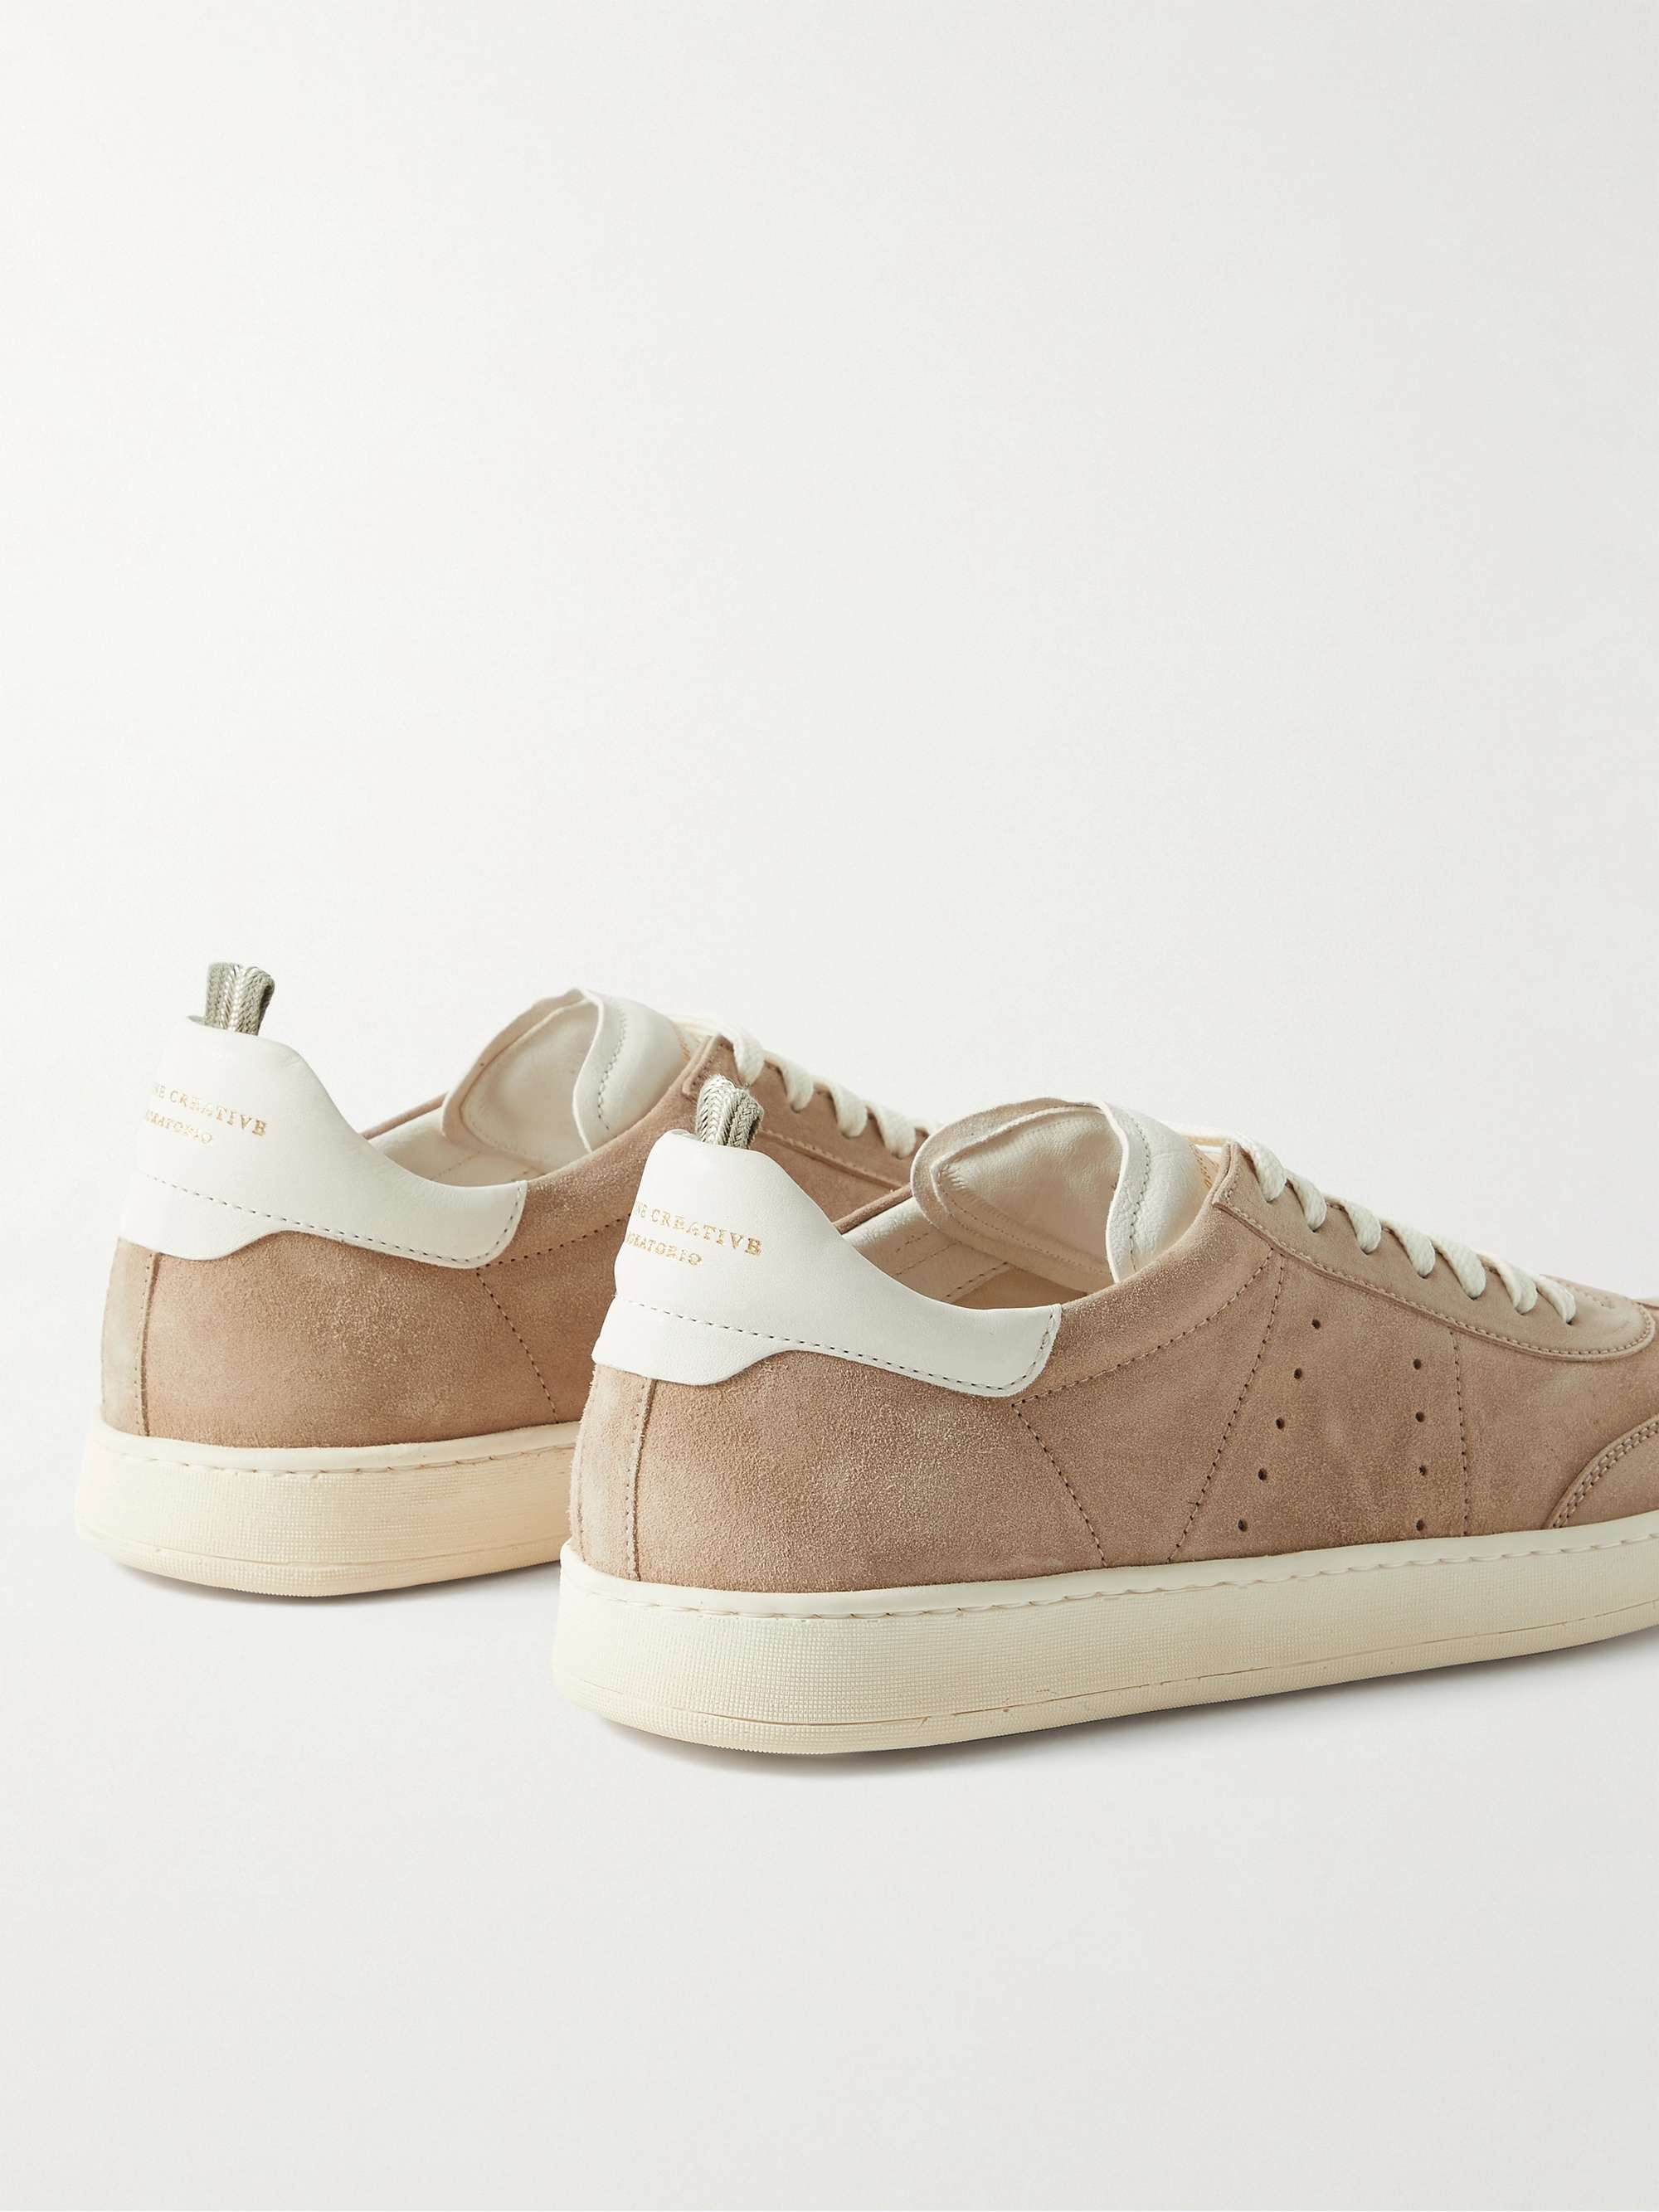 OFFICINE CREATIVE Kombo Leather-Trimmed Suede Sneakers